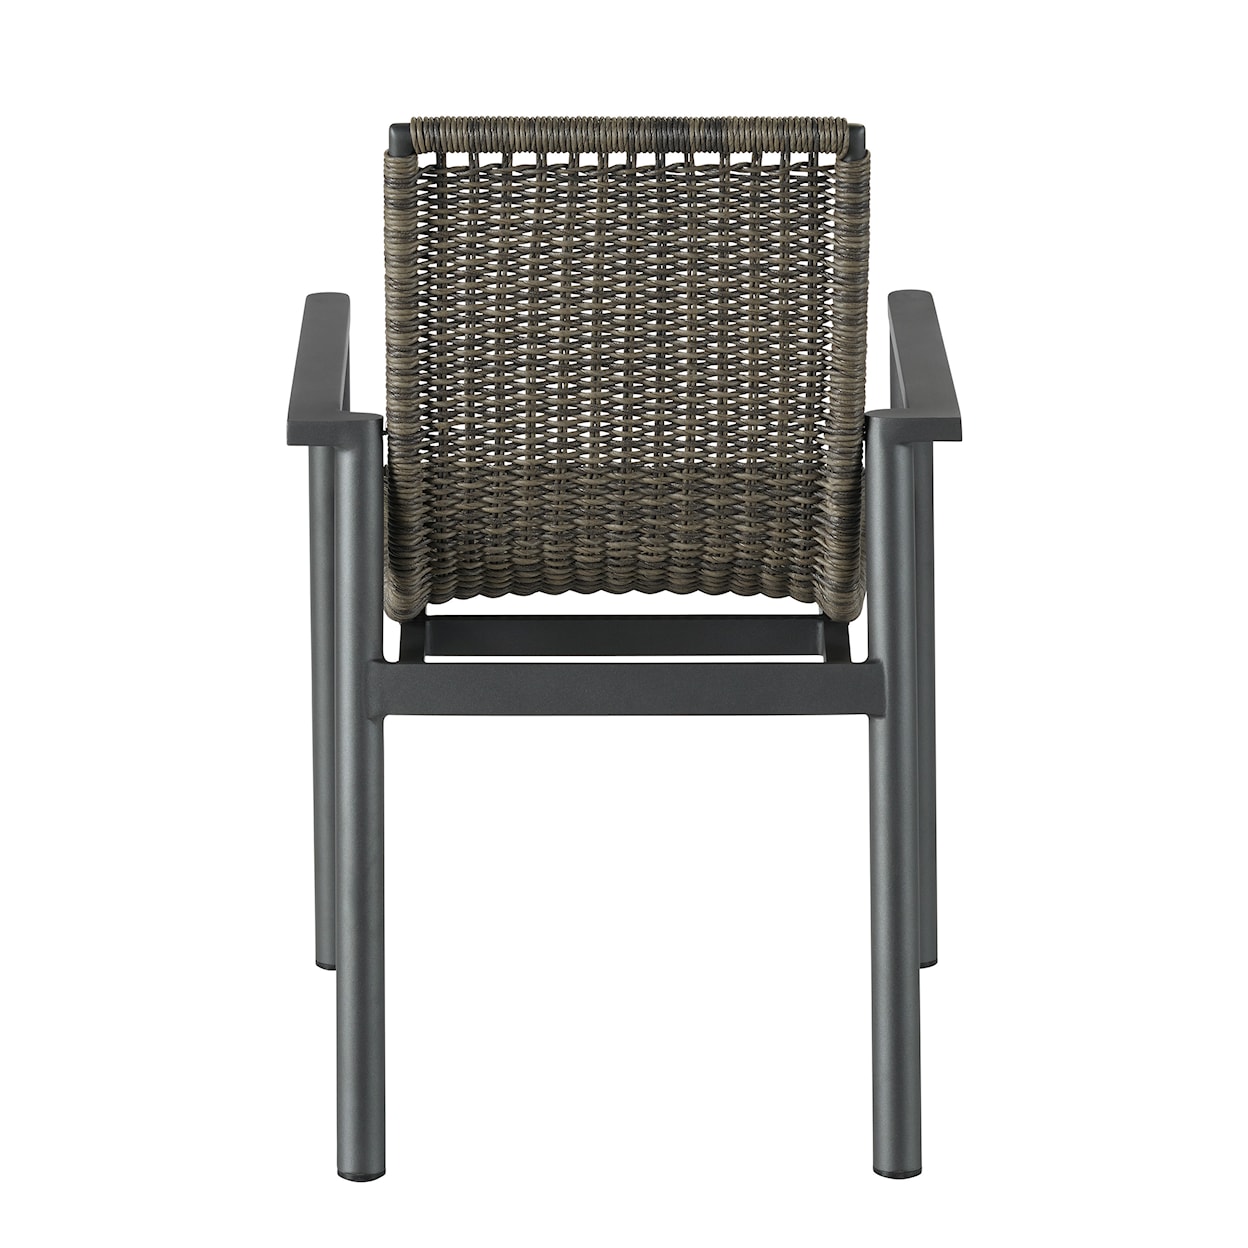 Universal Coastal Living Outdoor Outdoor Panama Dining Chair 